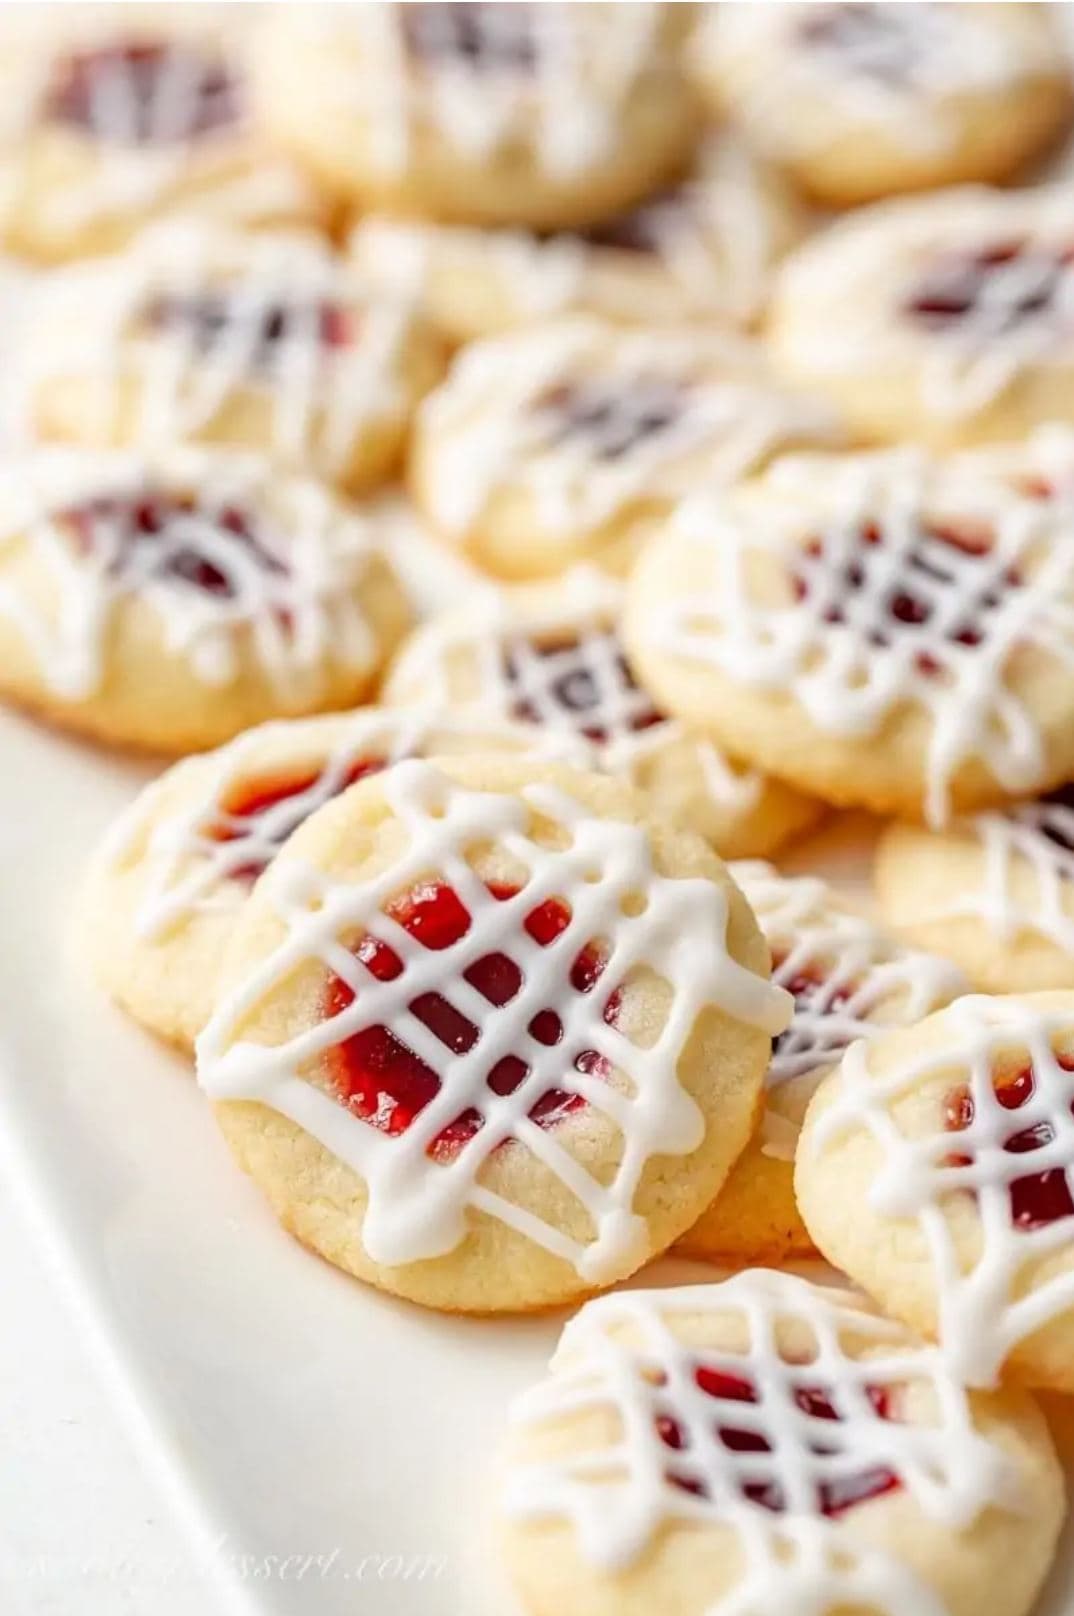 Raspberry Almond Thumbprint cookies decorated with a cross-hatching of glaze.